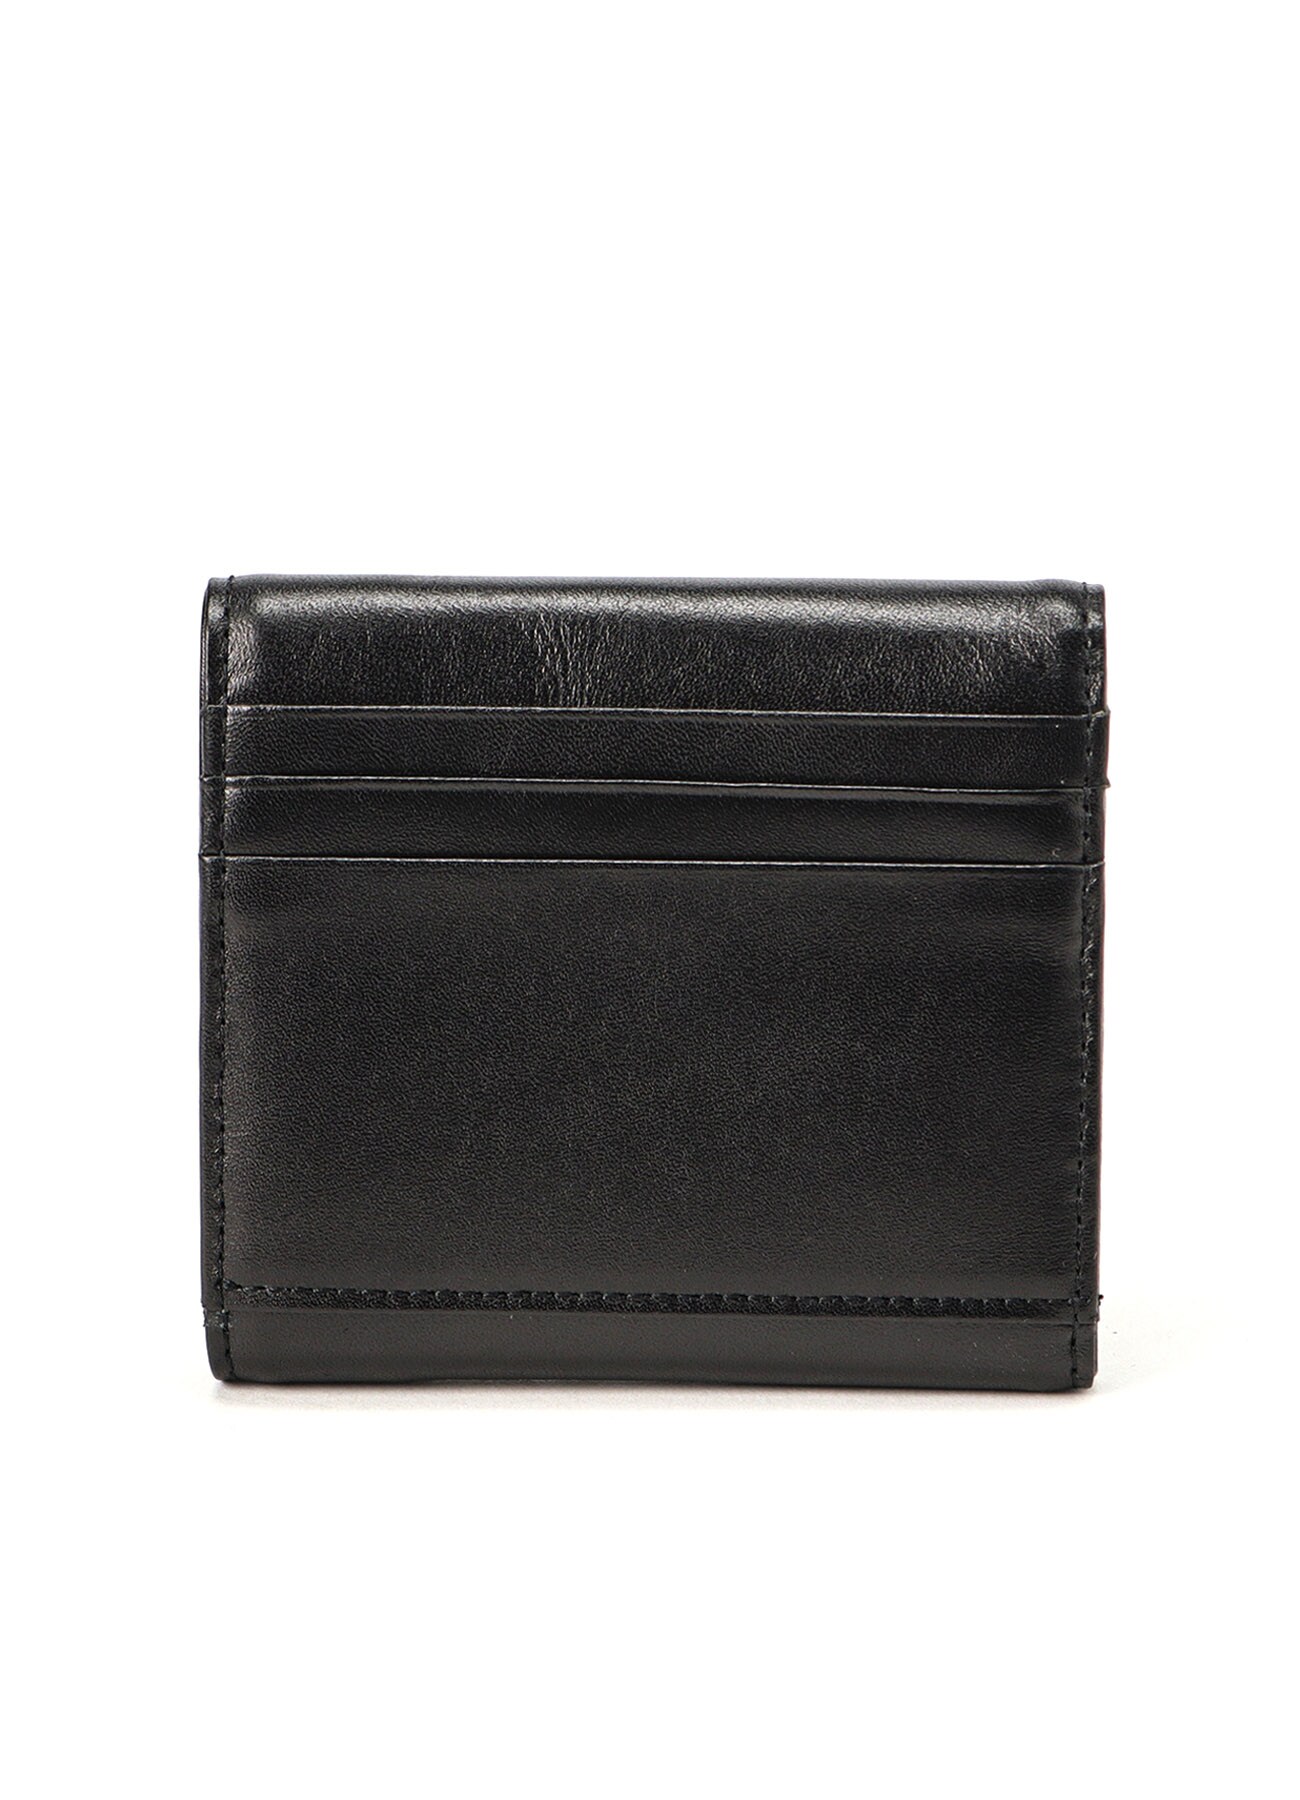 【7/26 12:00(JTS) Release】SEMI-GLOSS SMOOTH LEATHER MINI FOLDING WALLET